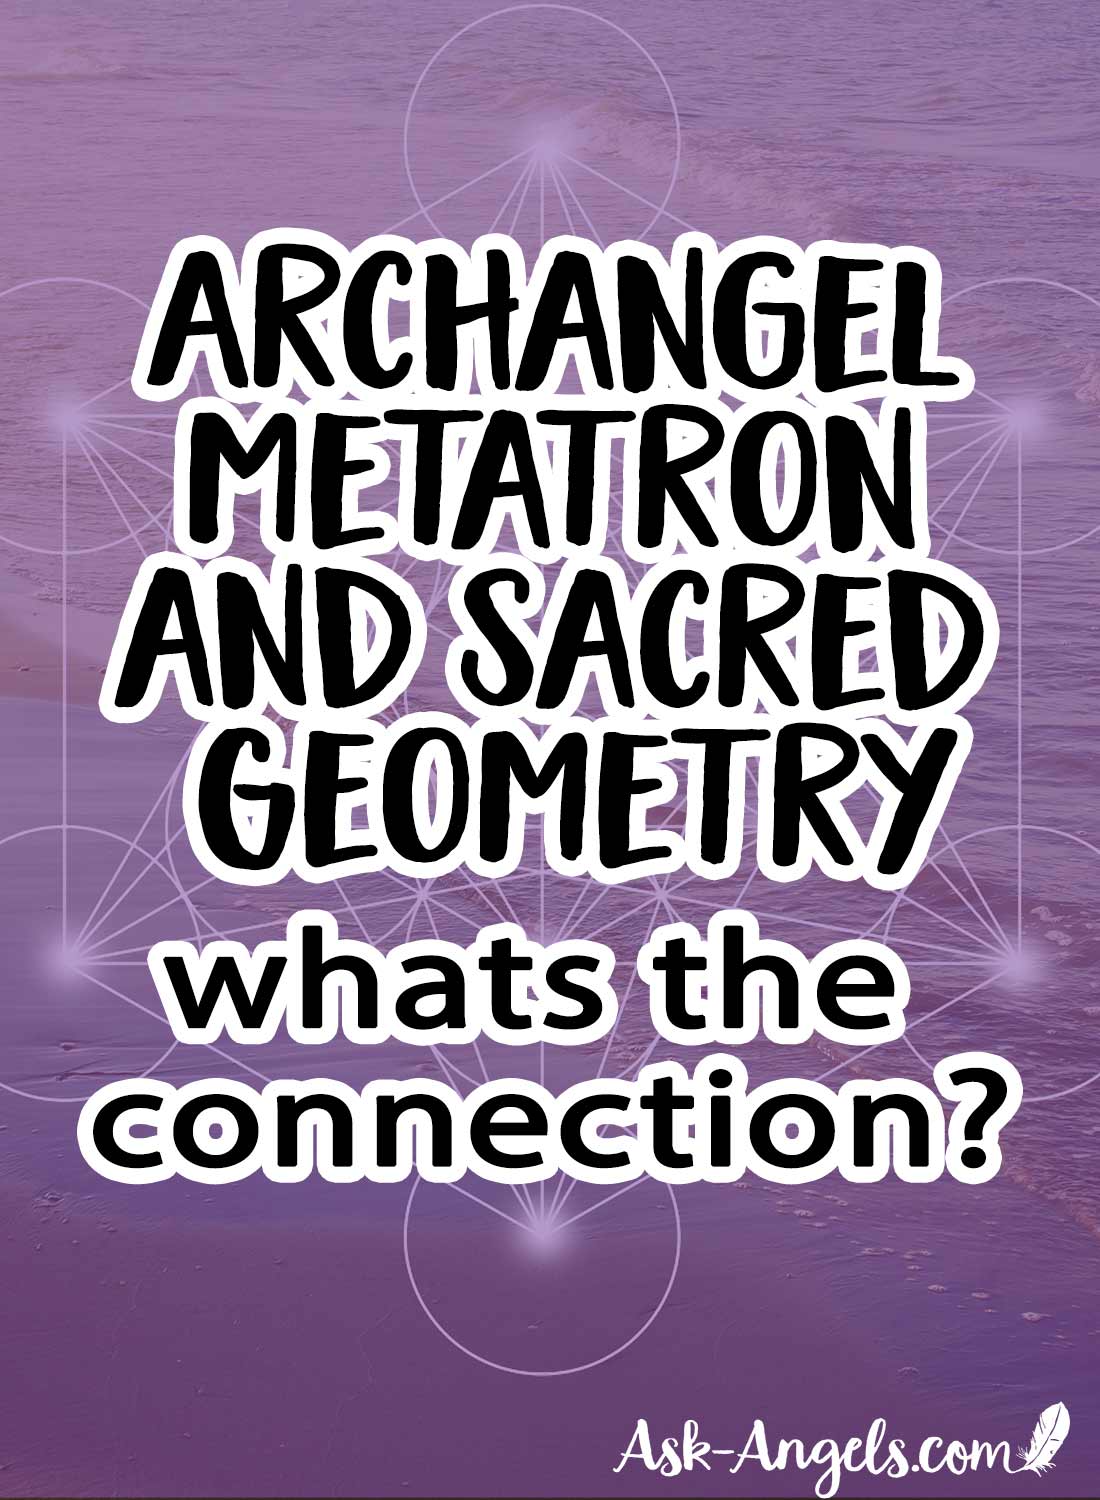 Archangel Metatron and Sacred Geometry - Whats the Connection?